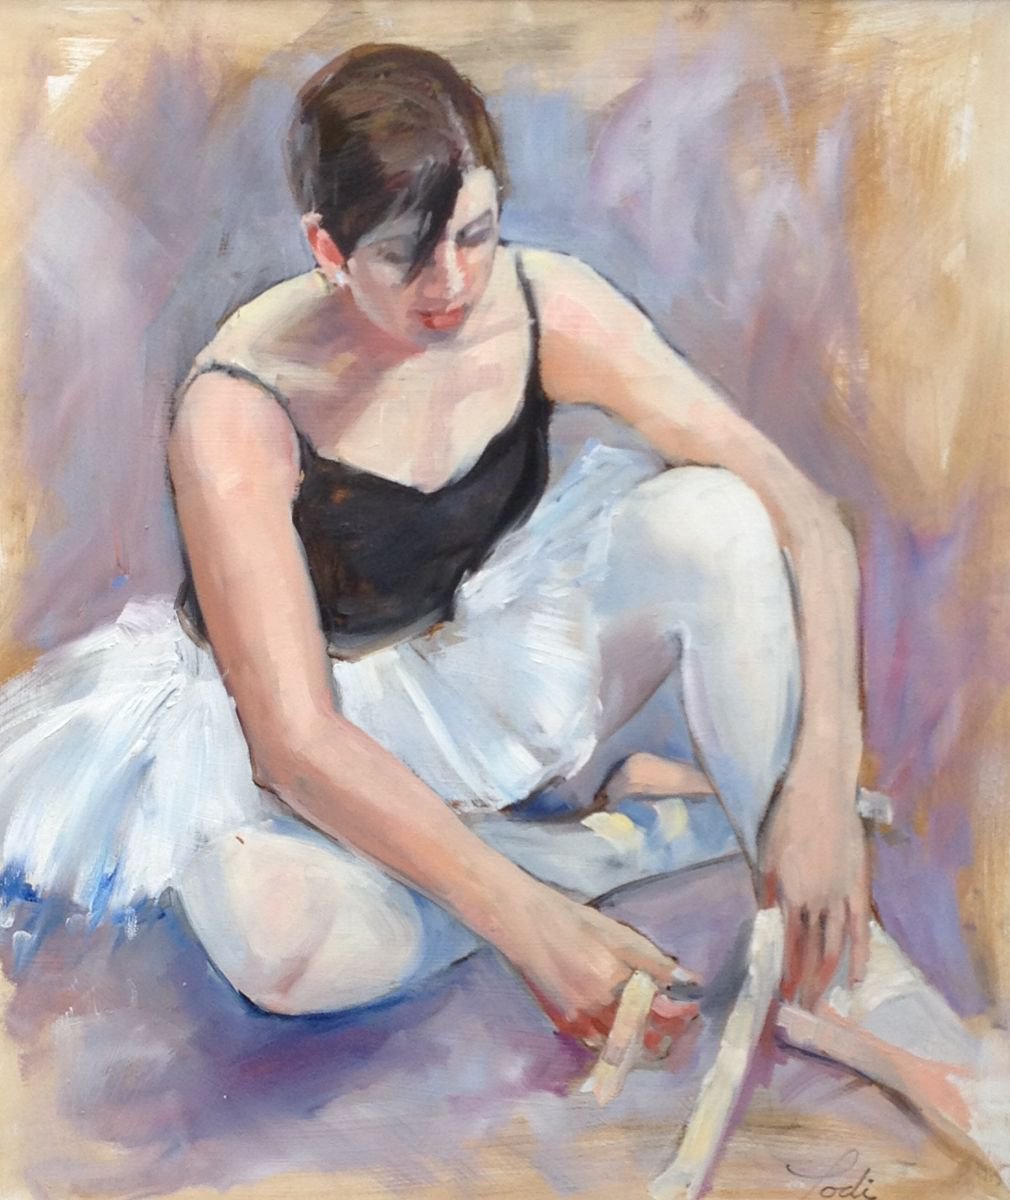 DANCER TYING HER SHOES by Podi Lawrence